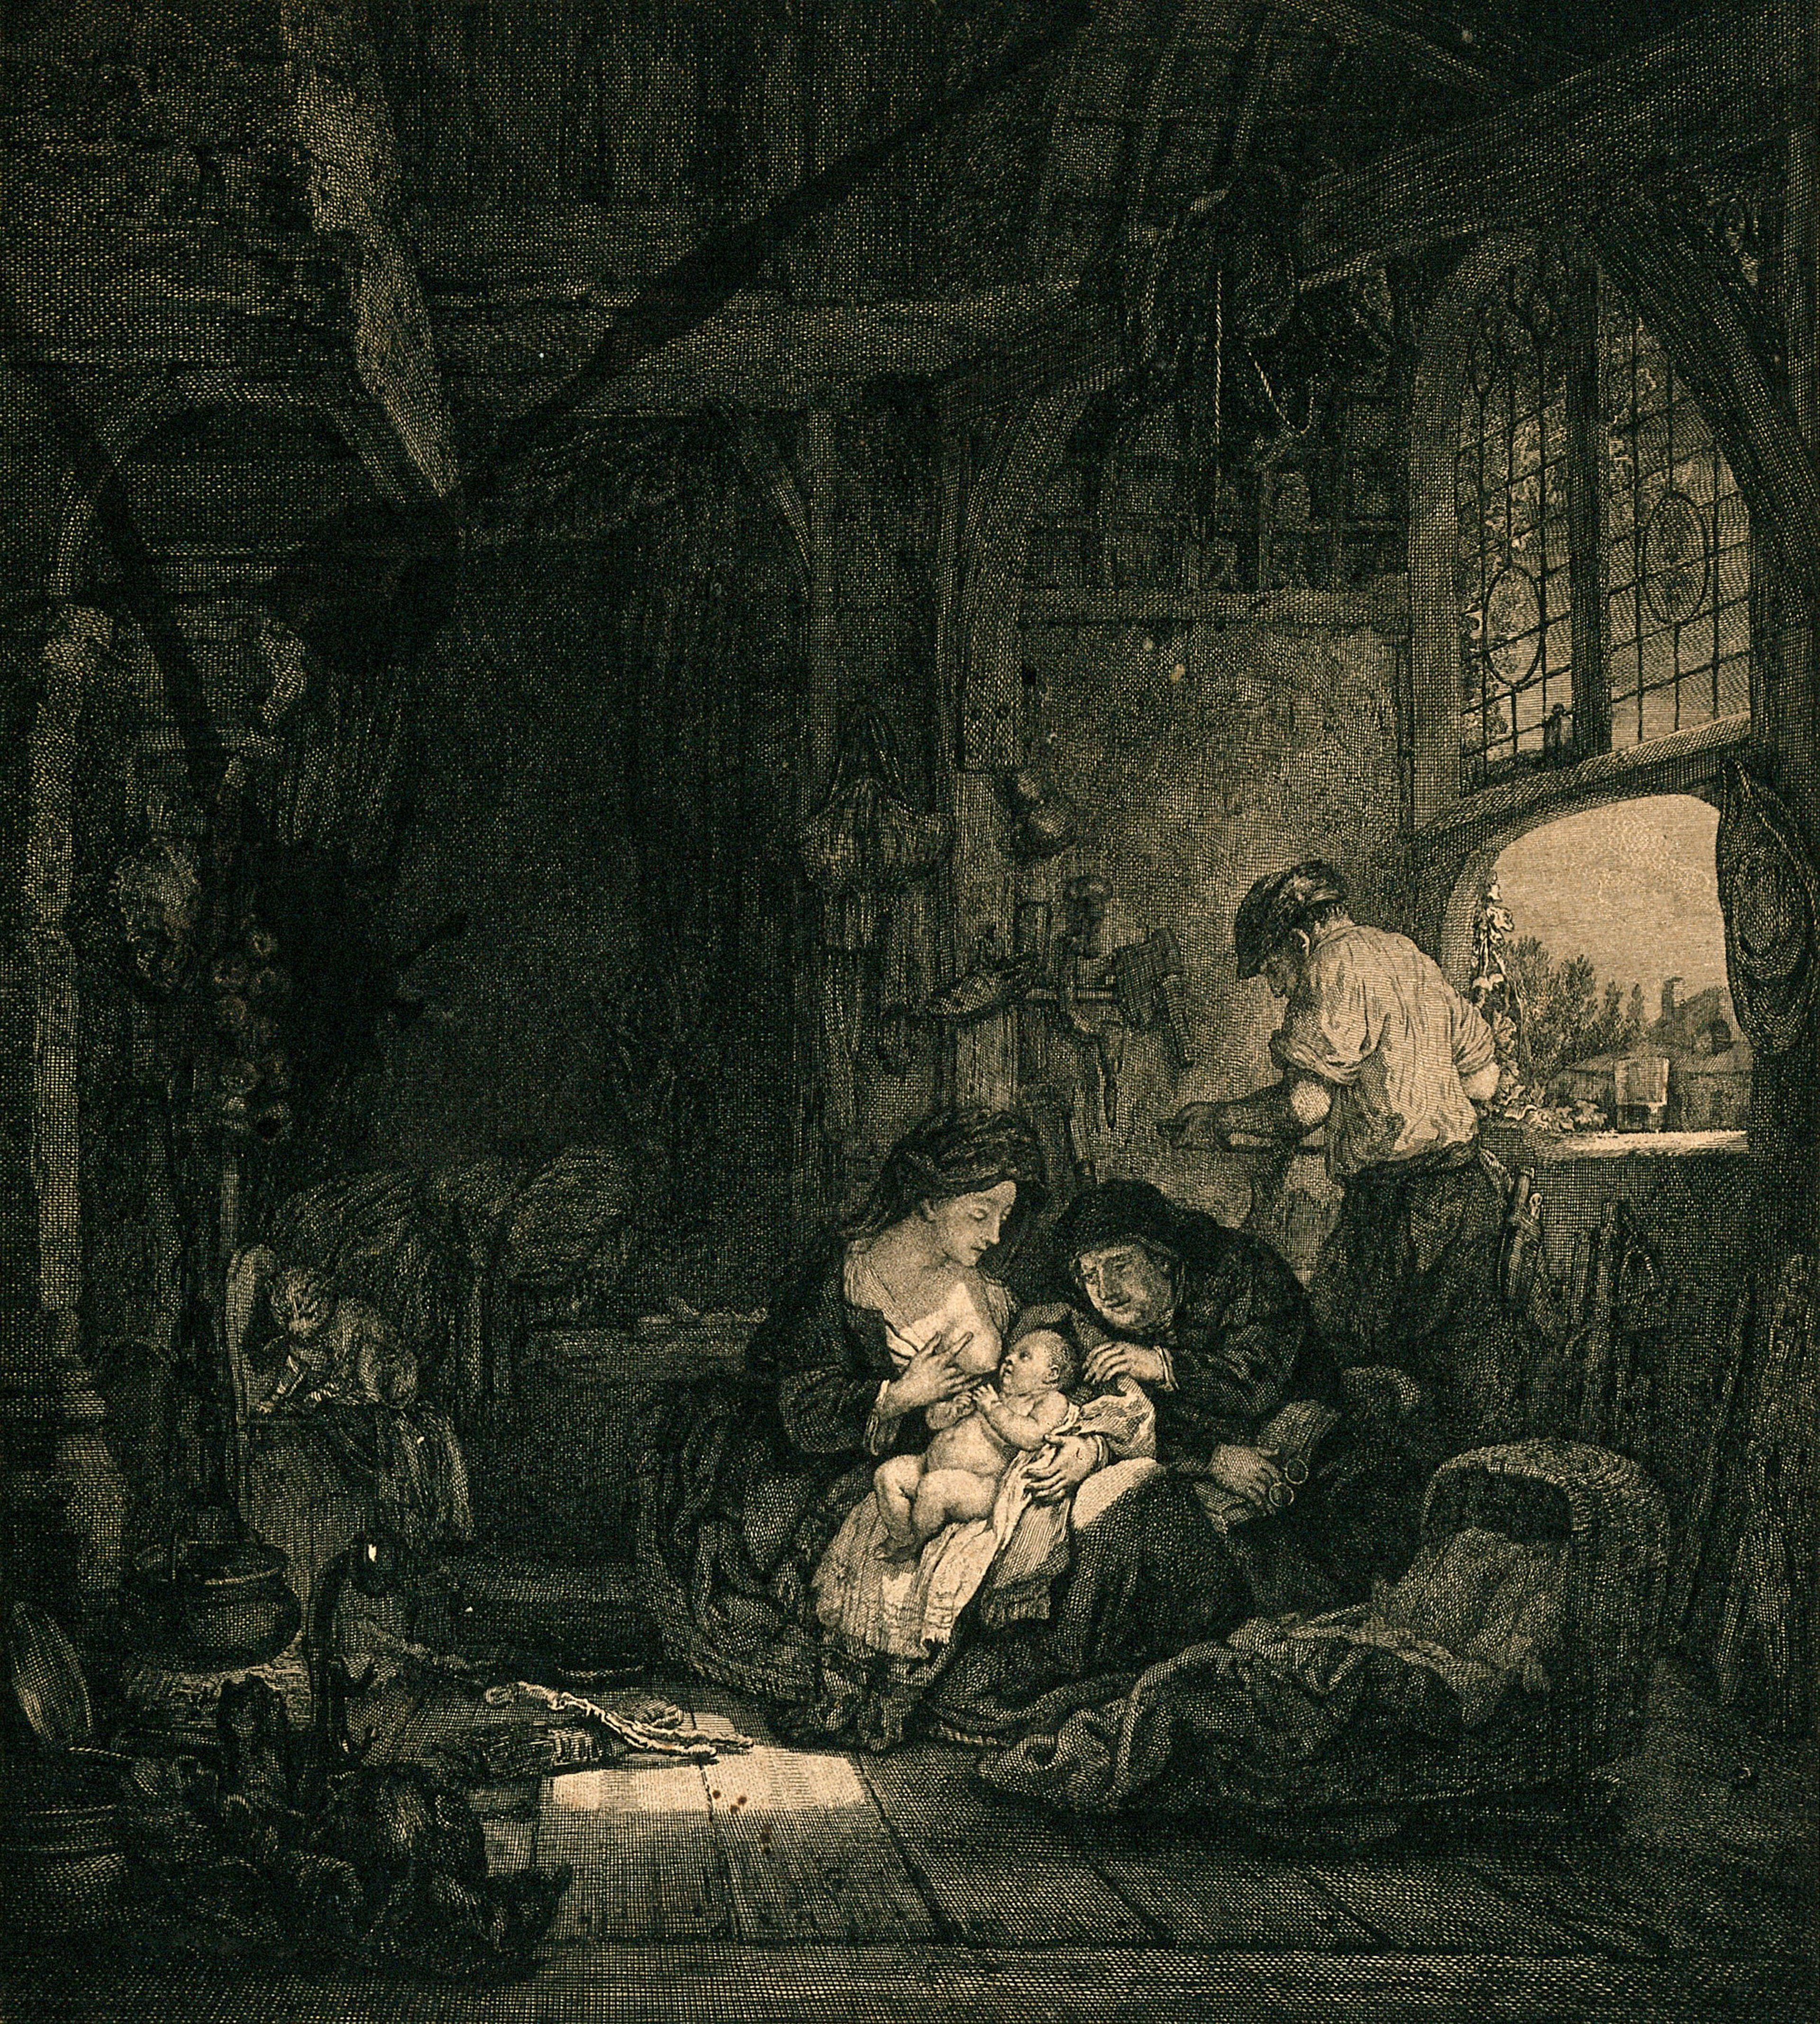 A woman breast feeding her baby in the family's home and workshop; perhaps a comparison to the Holy Family. Engraving by J. Le Bas and P. Martini, 1772, after Rembrandt van Rijn, 1640.